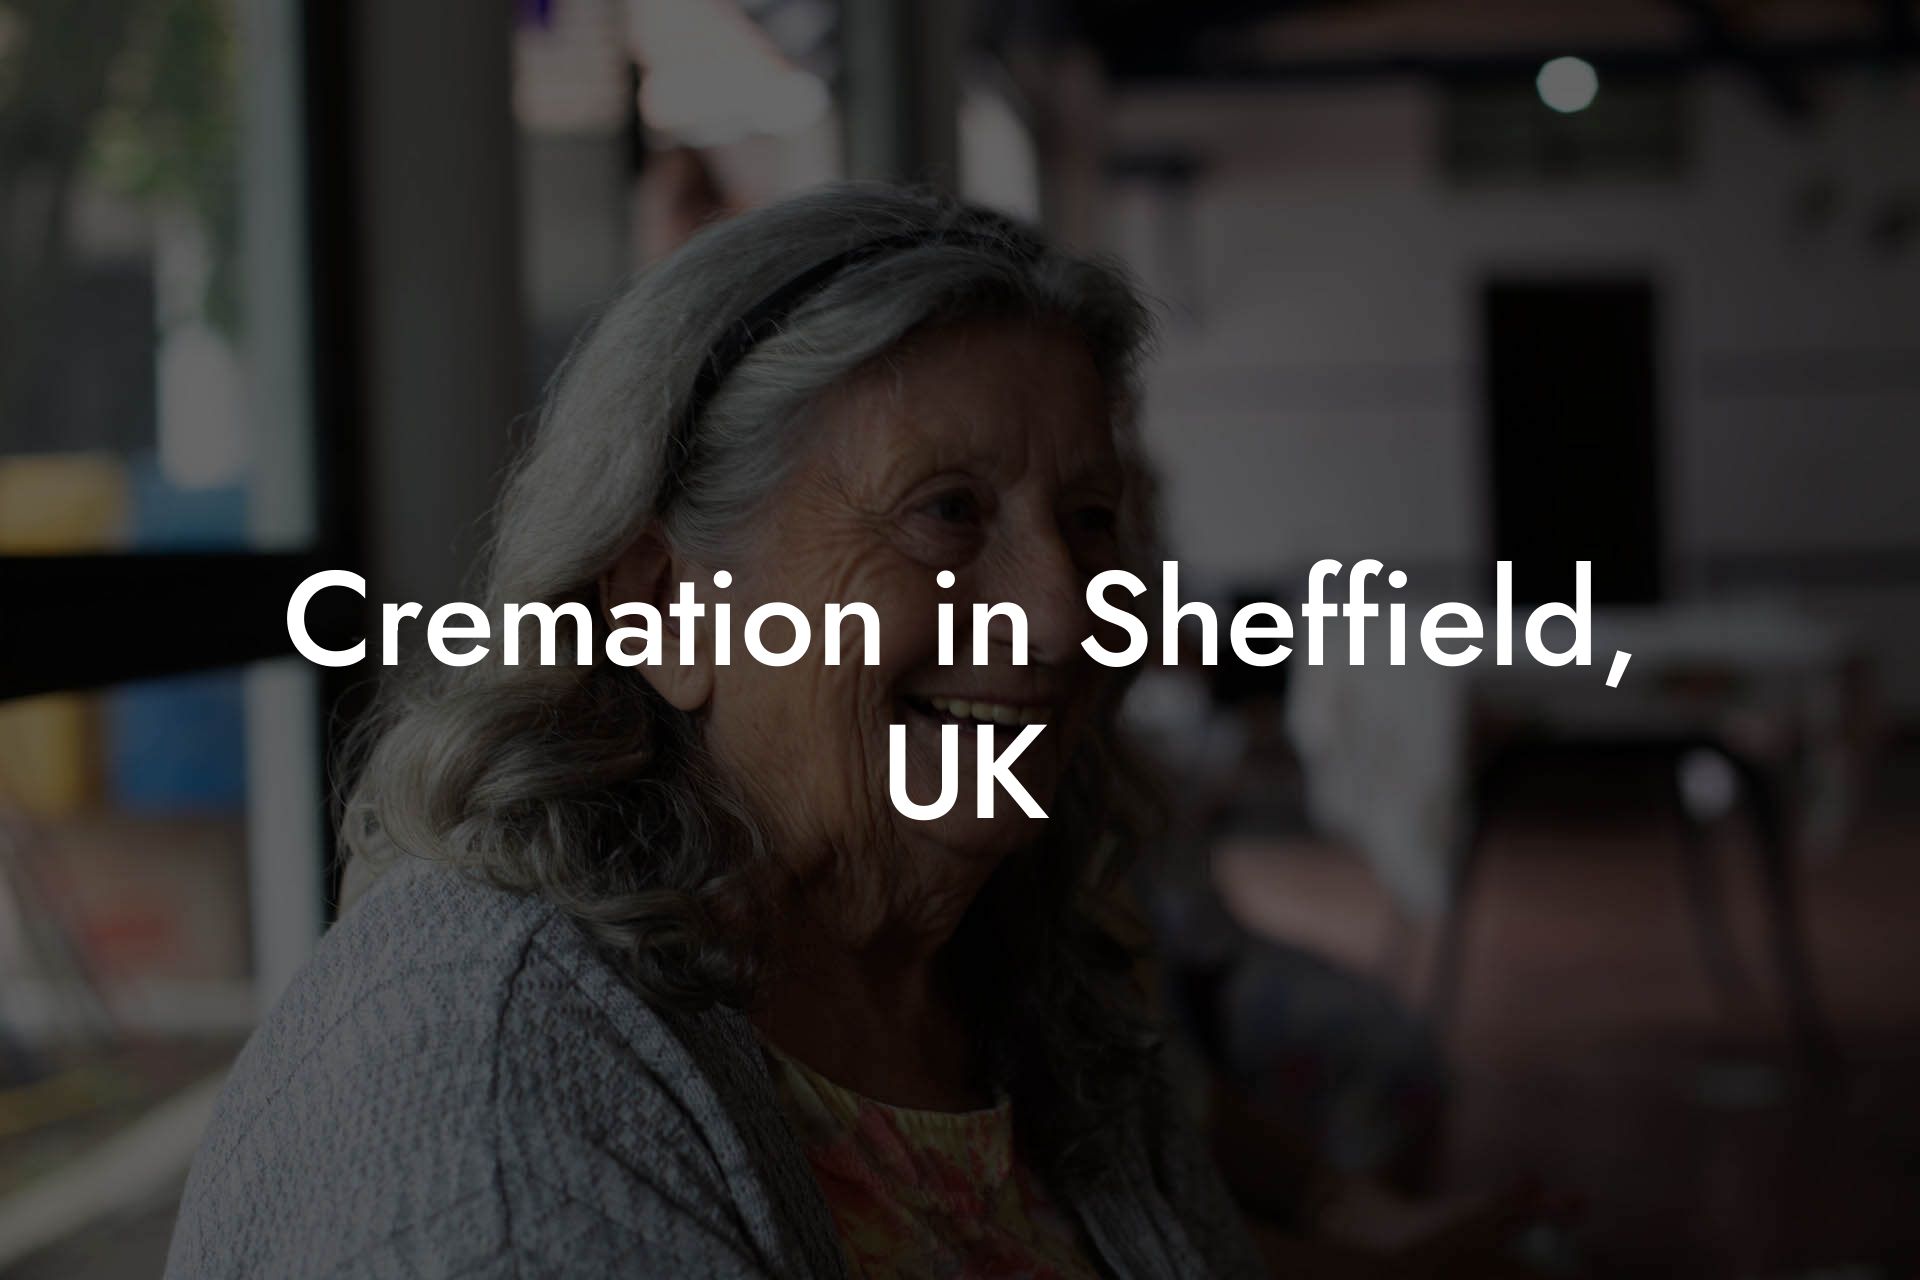 Cremation in Sheffield, UK